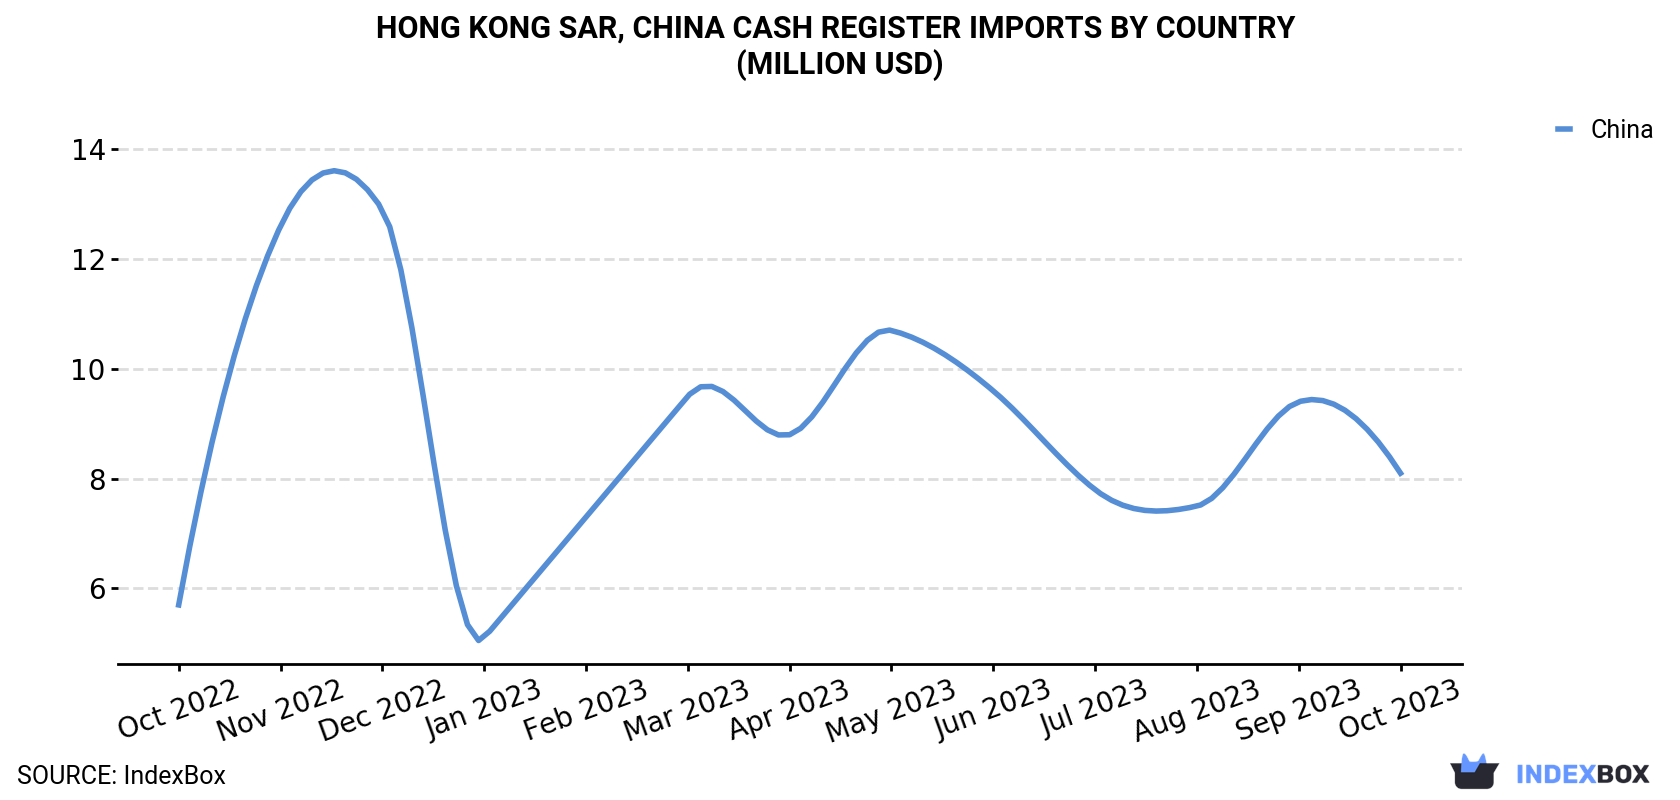 Hong Kong Cash Register Imports By Country (Million USD)